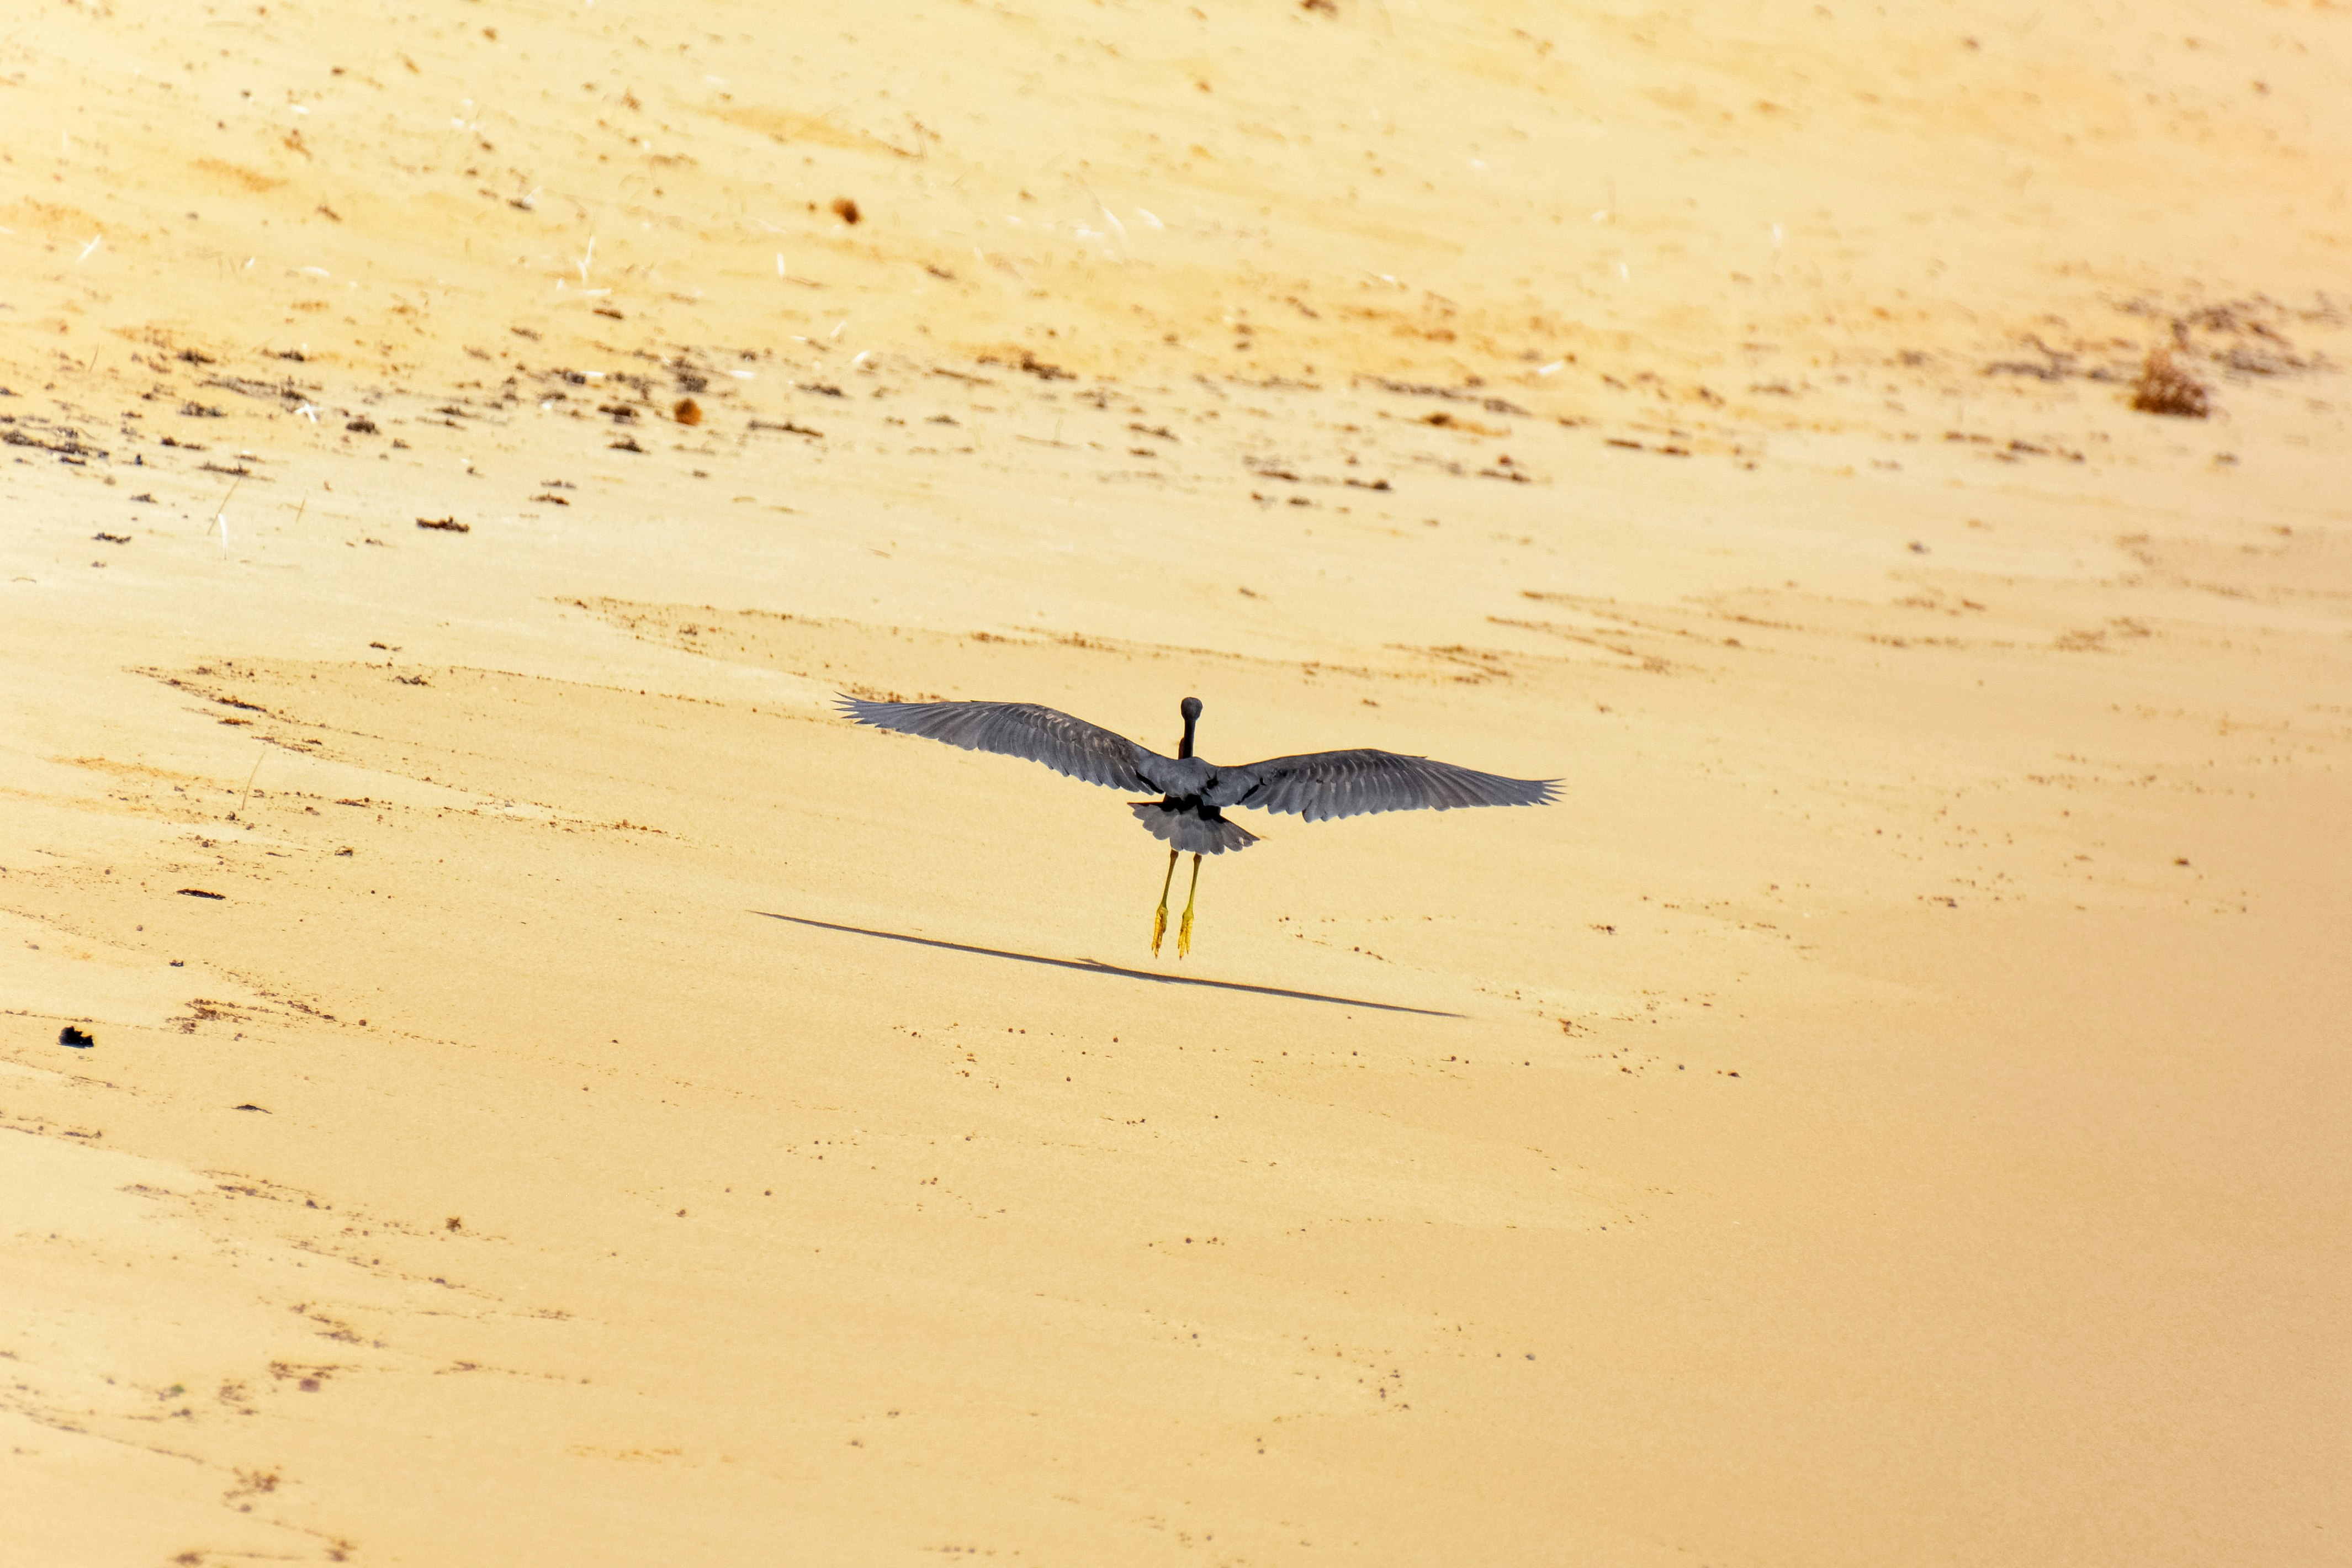 grey and black bird on brown sand during daytime